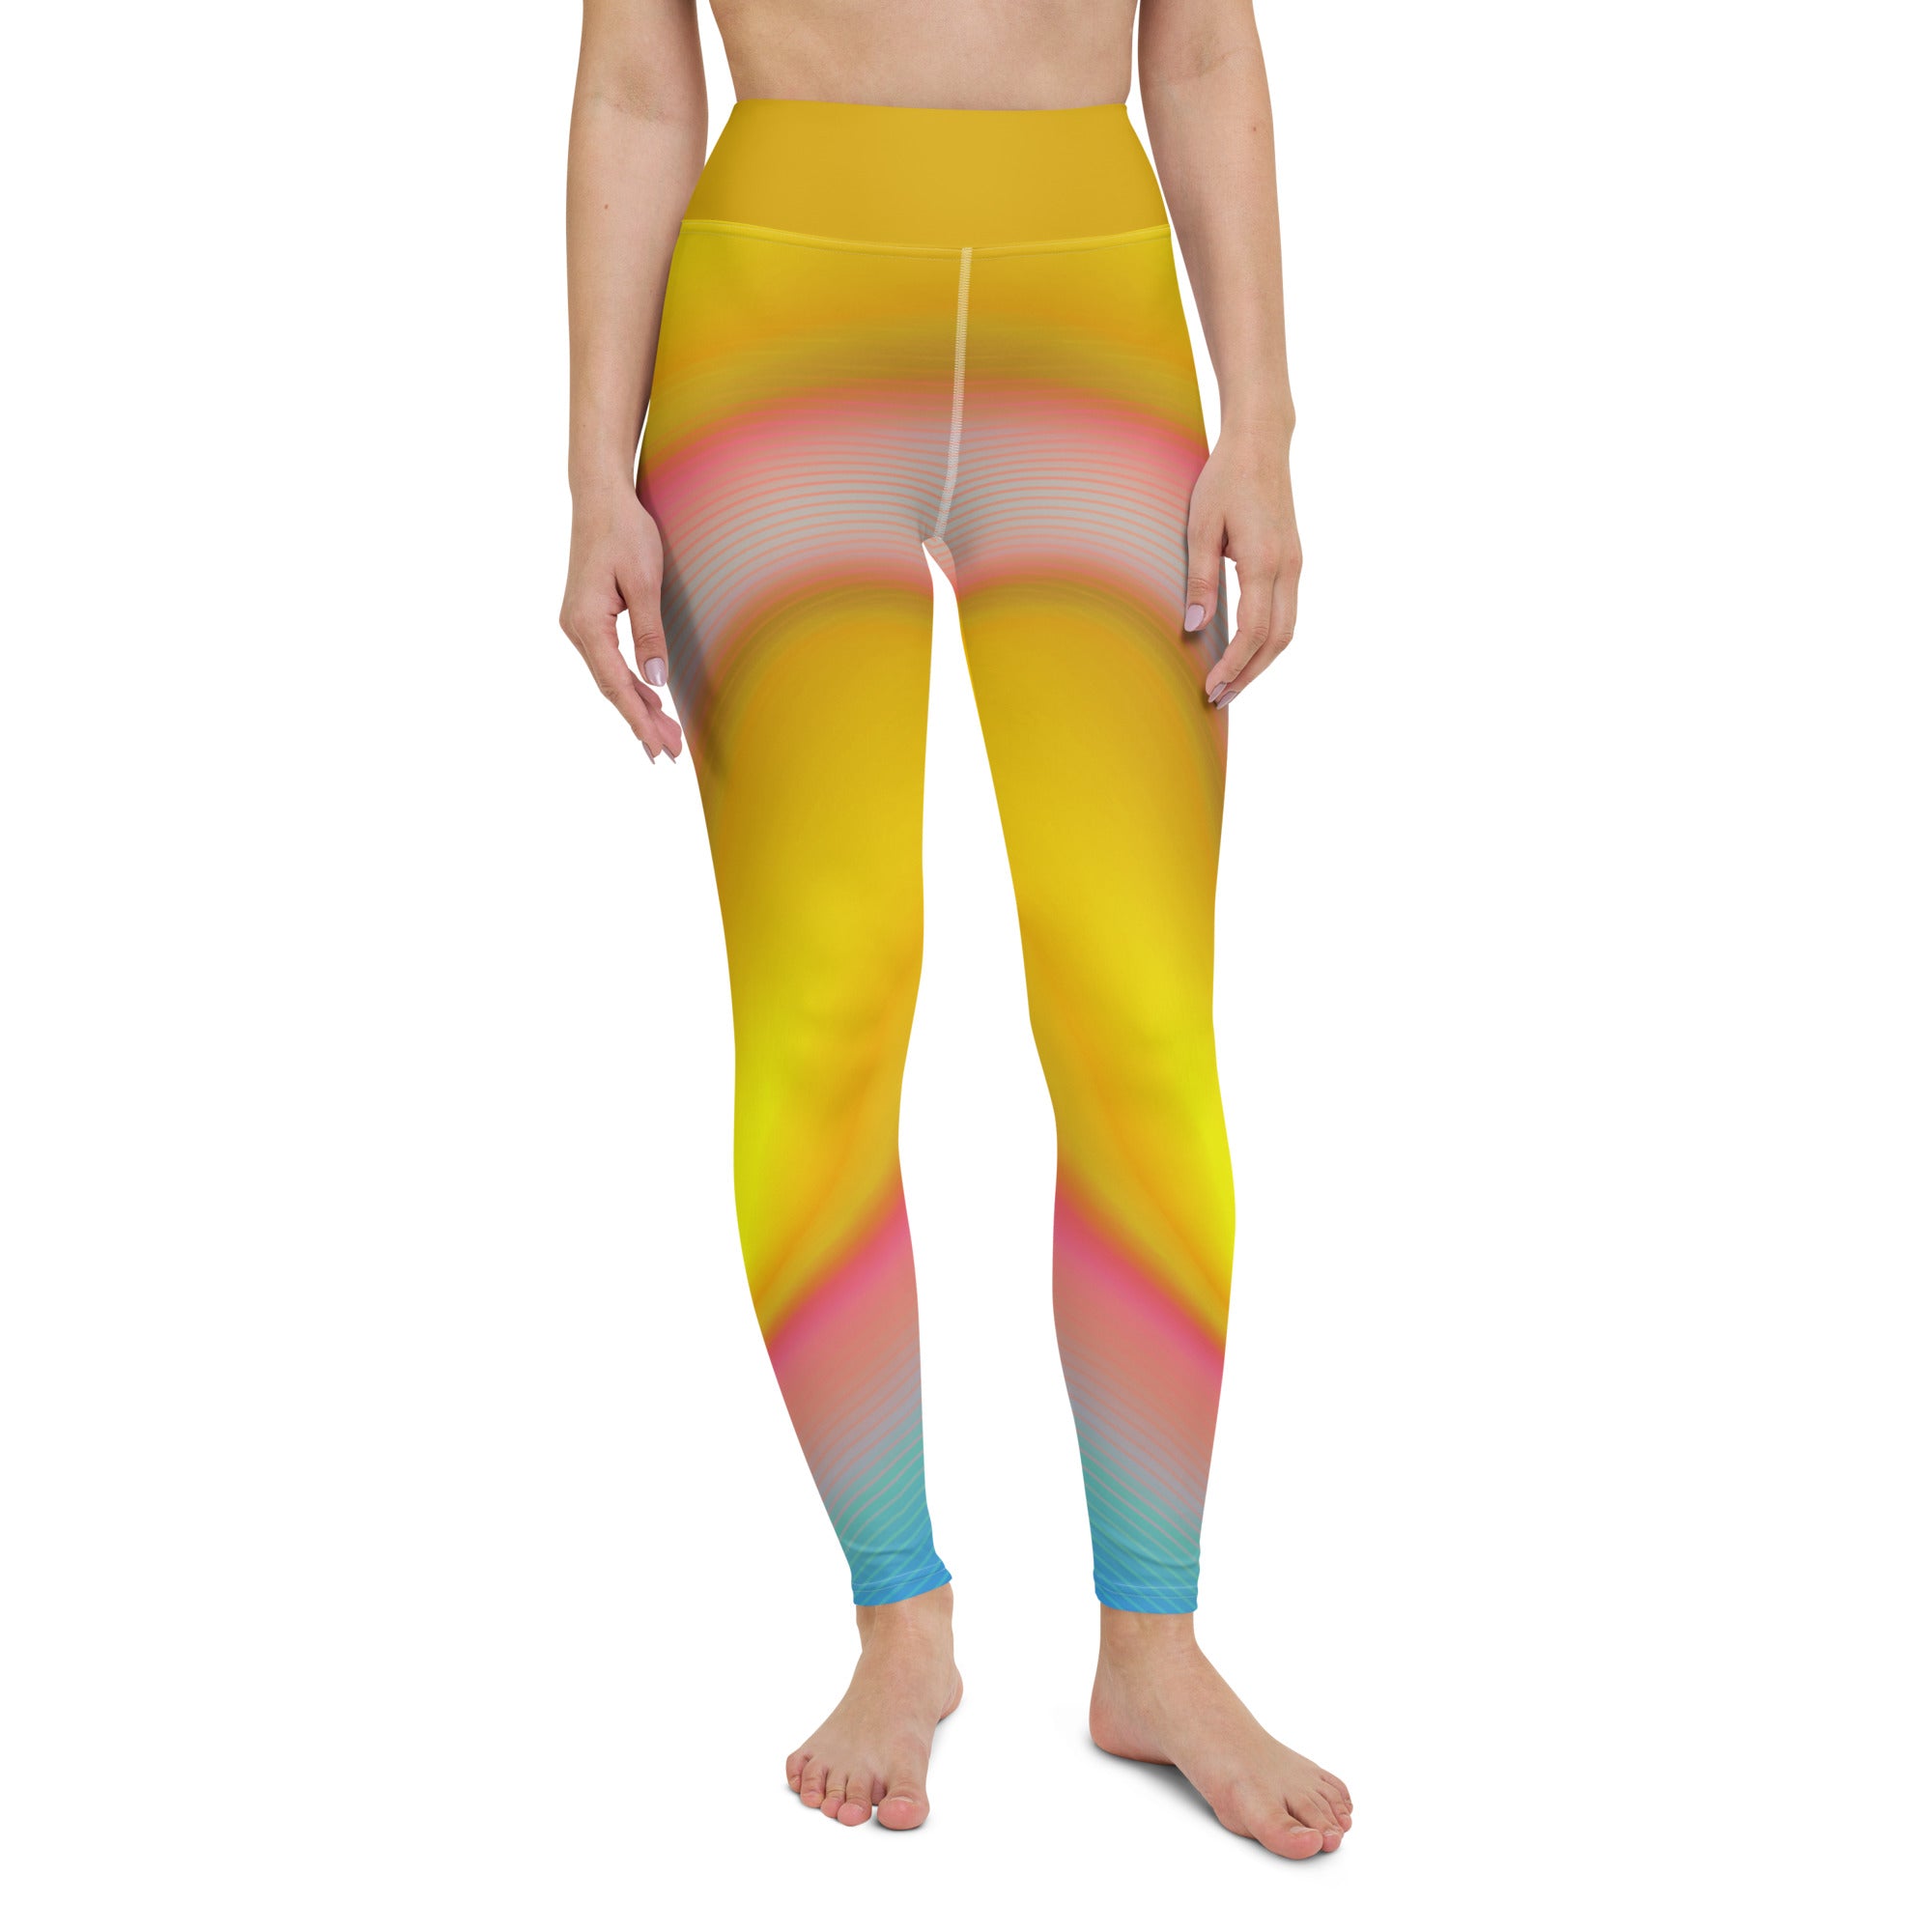 Elevating a fitness routine with the colorful style of Radiant Ripple Yoga Leggings.